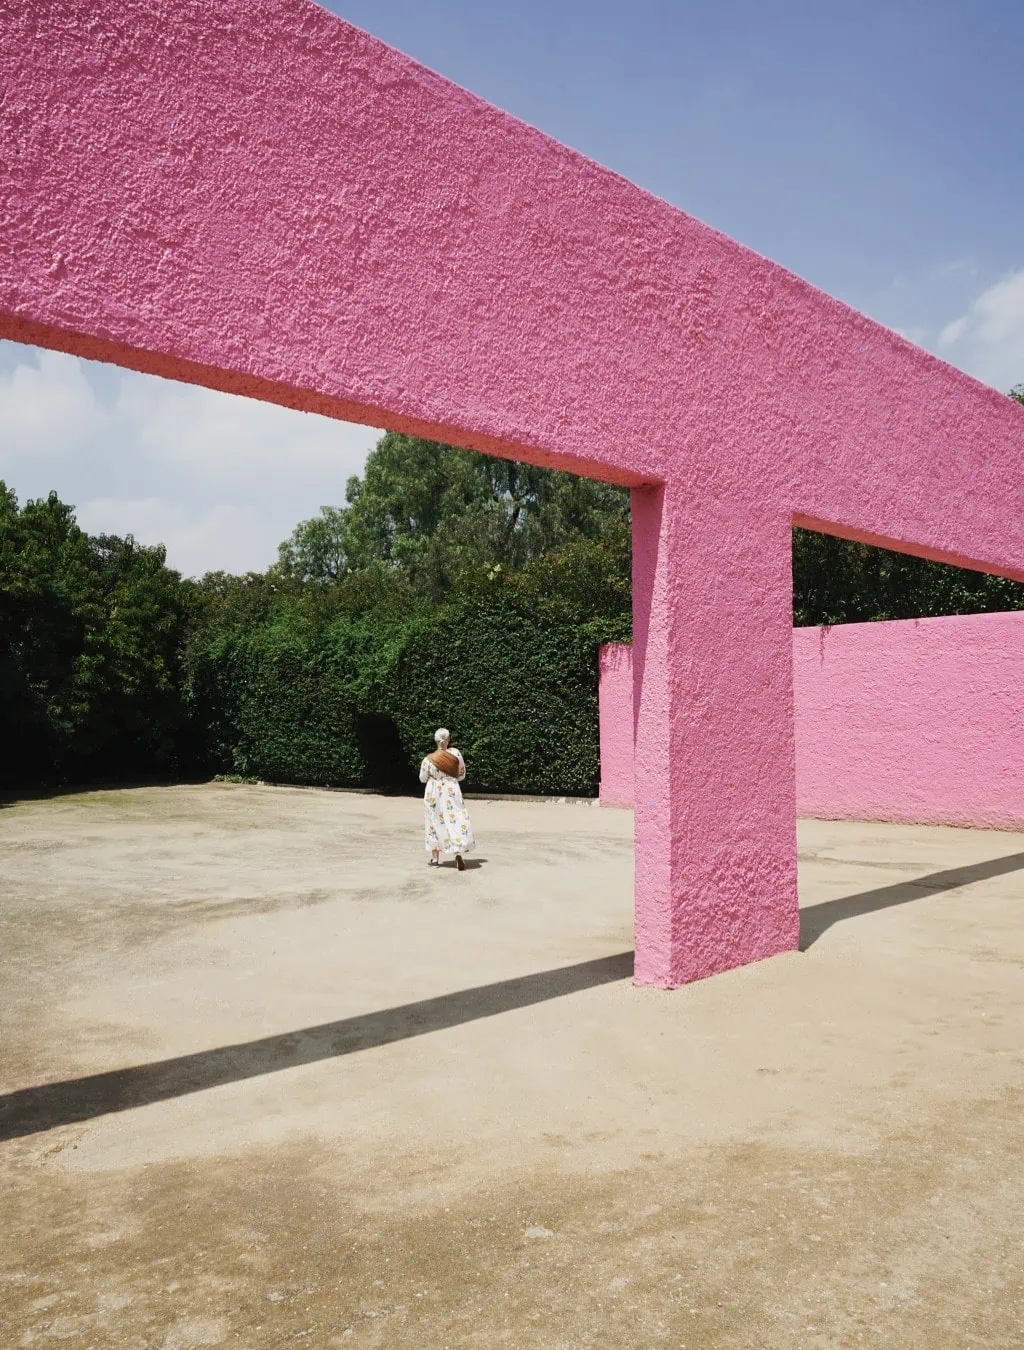 Brittany walks under a bright pink structure at Luis Barragán's San Cristobal stables in Mexico City